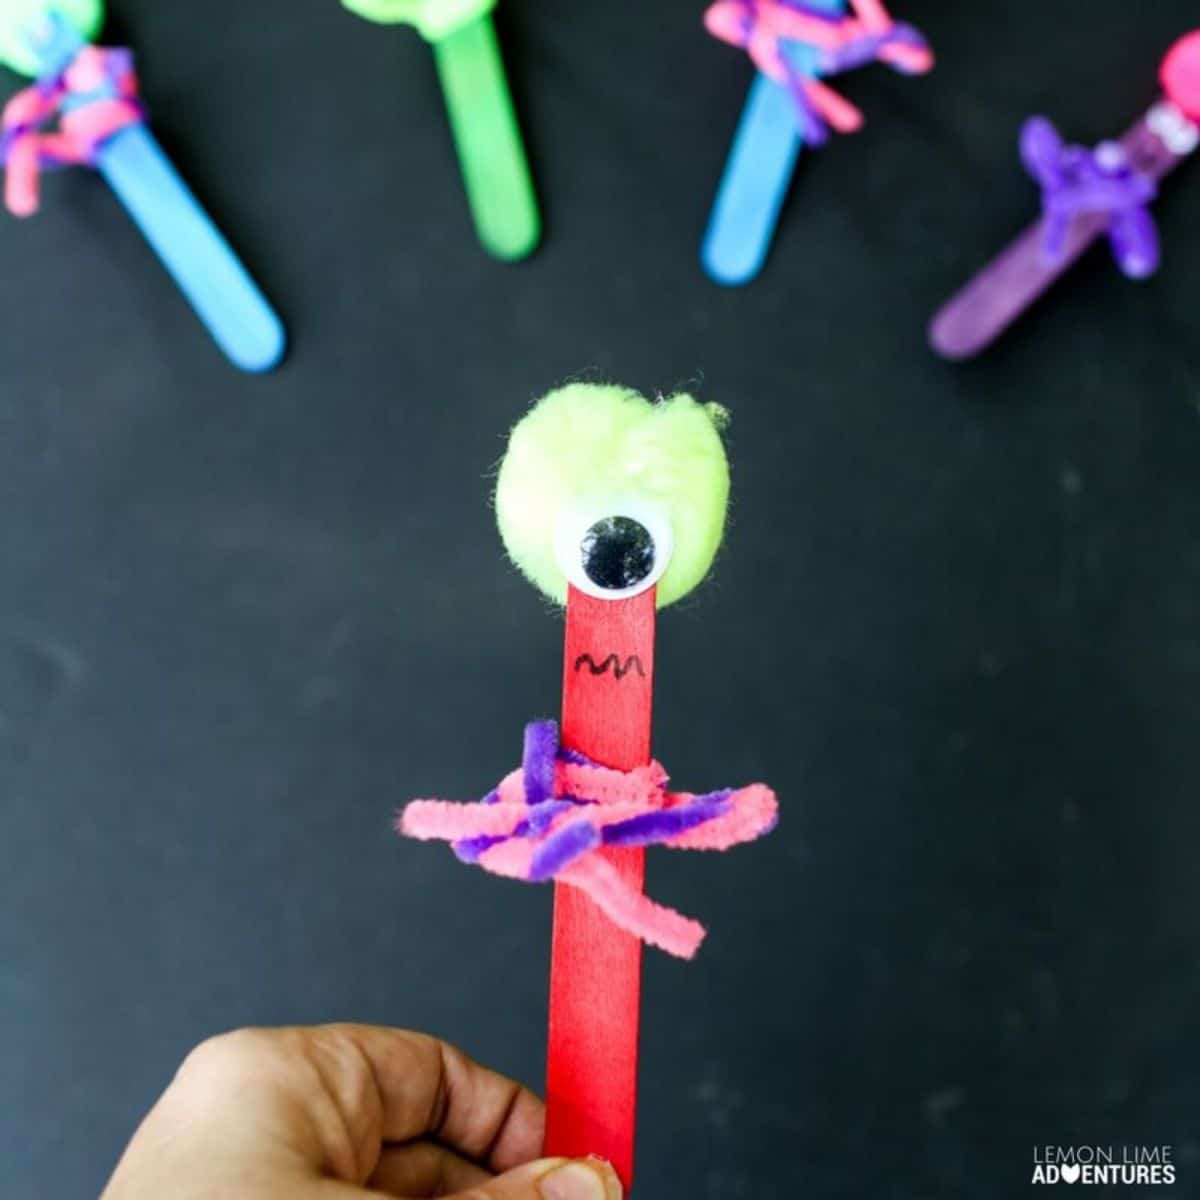 a monster made out of a red popsicle stick, a green pom pom and some pipe cleaners can be seen in front of 4 other creatures